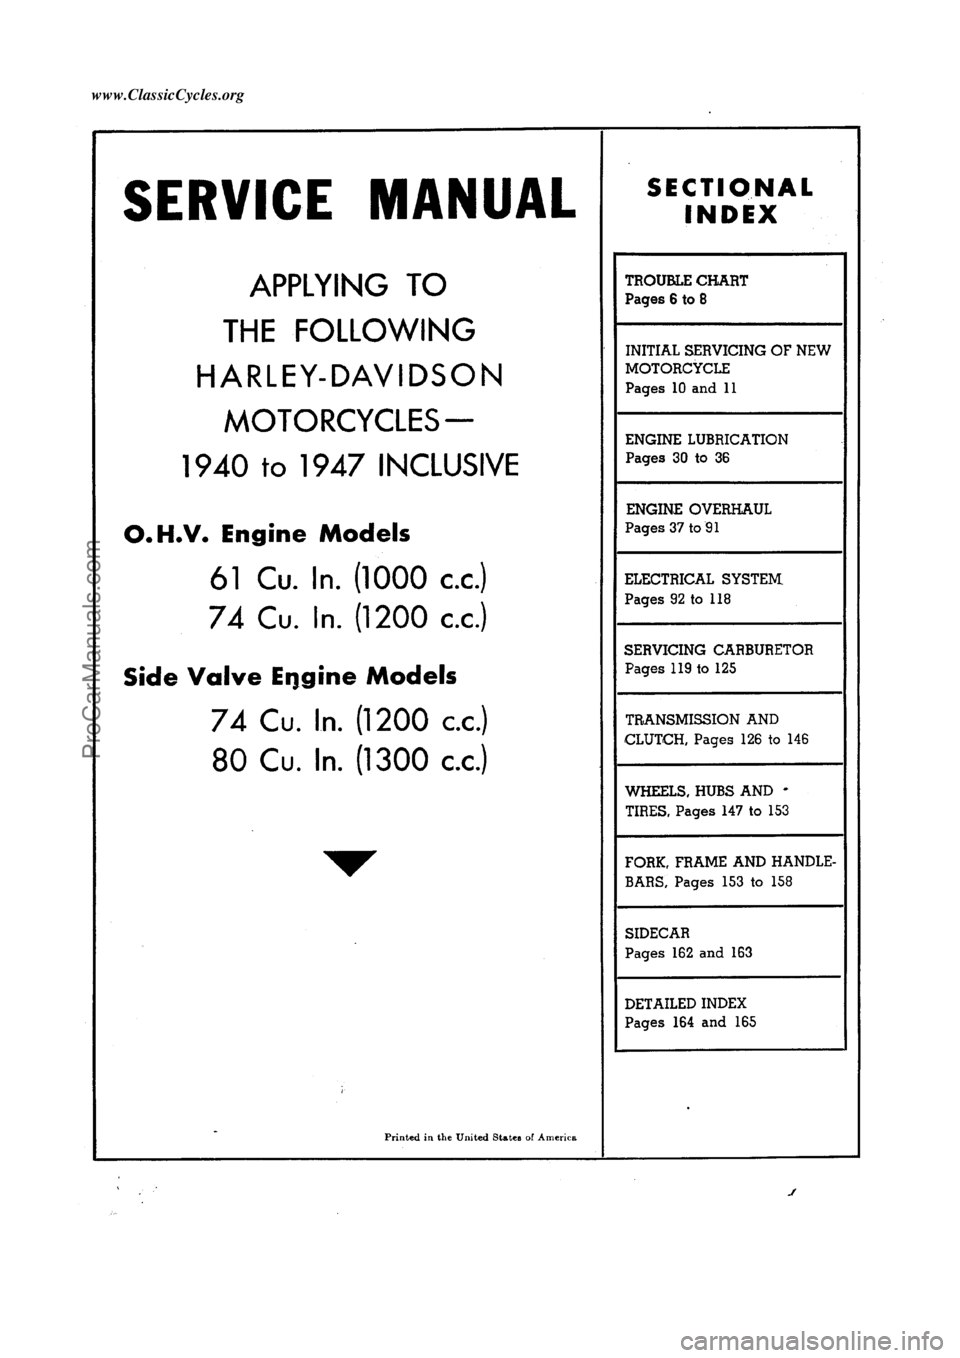 HARLEY-DAVIDSON KNUCKLEHEAD 1940  Service Manual ProCarManuals.com     www.ClassicCycles.org  